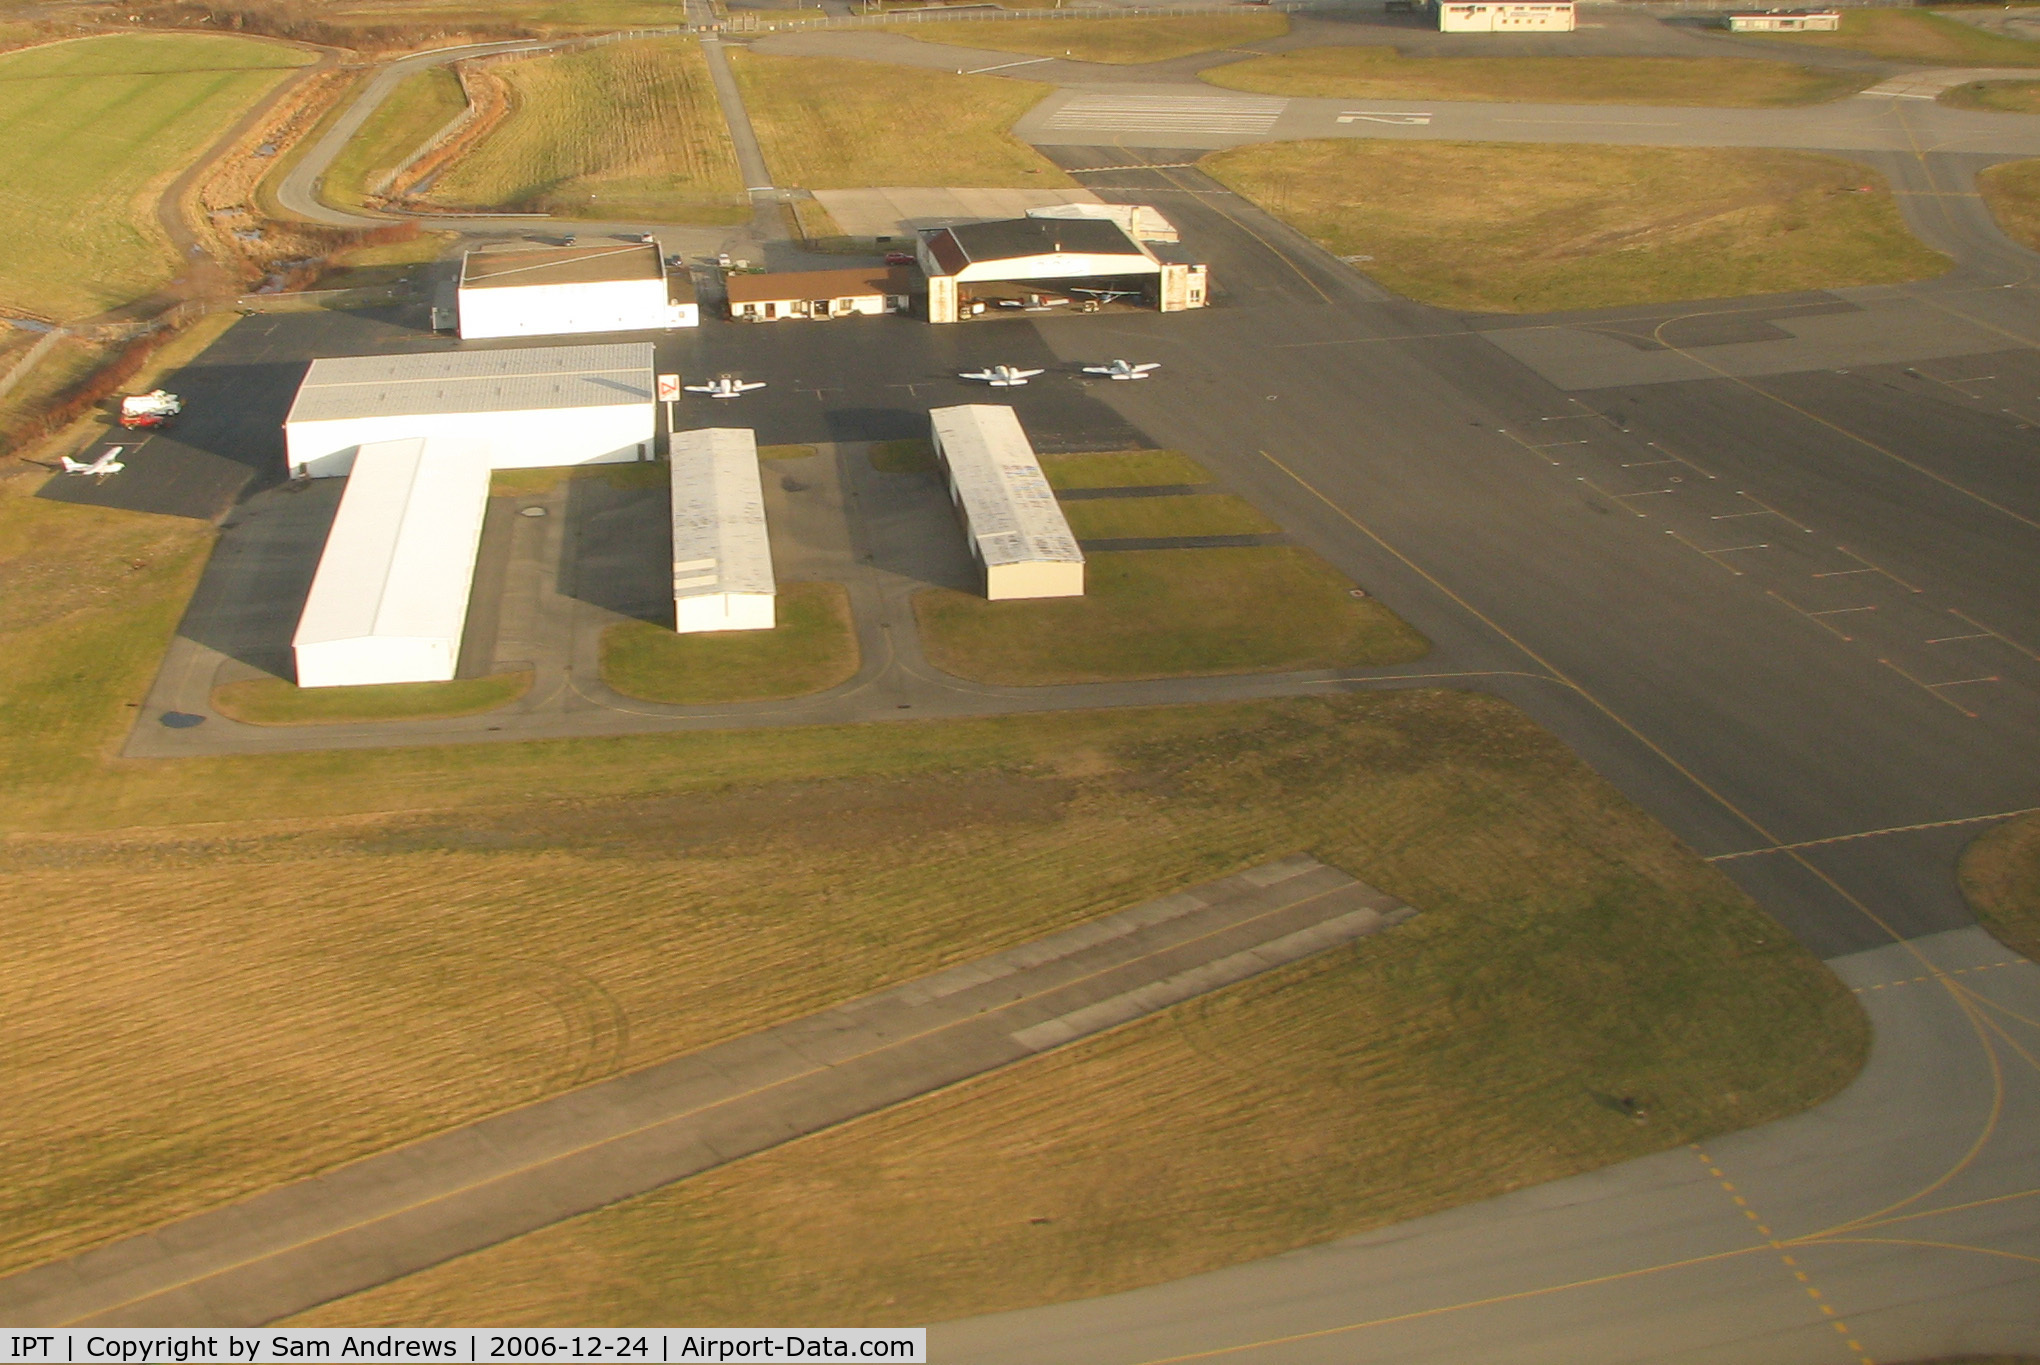 Williamsport Regional Airport (IPT) - A nice aerial view of the one and only FBO on the field.